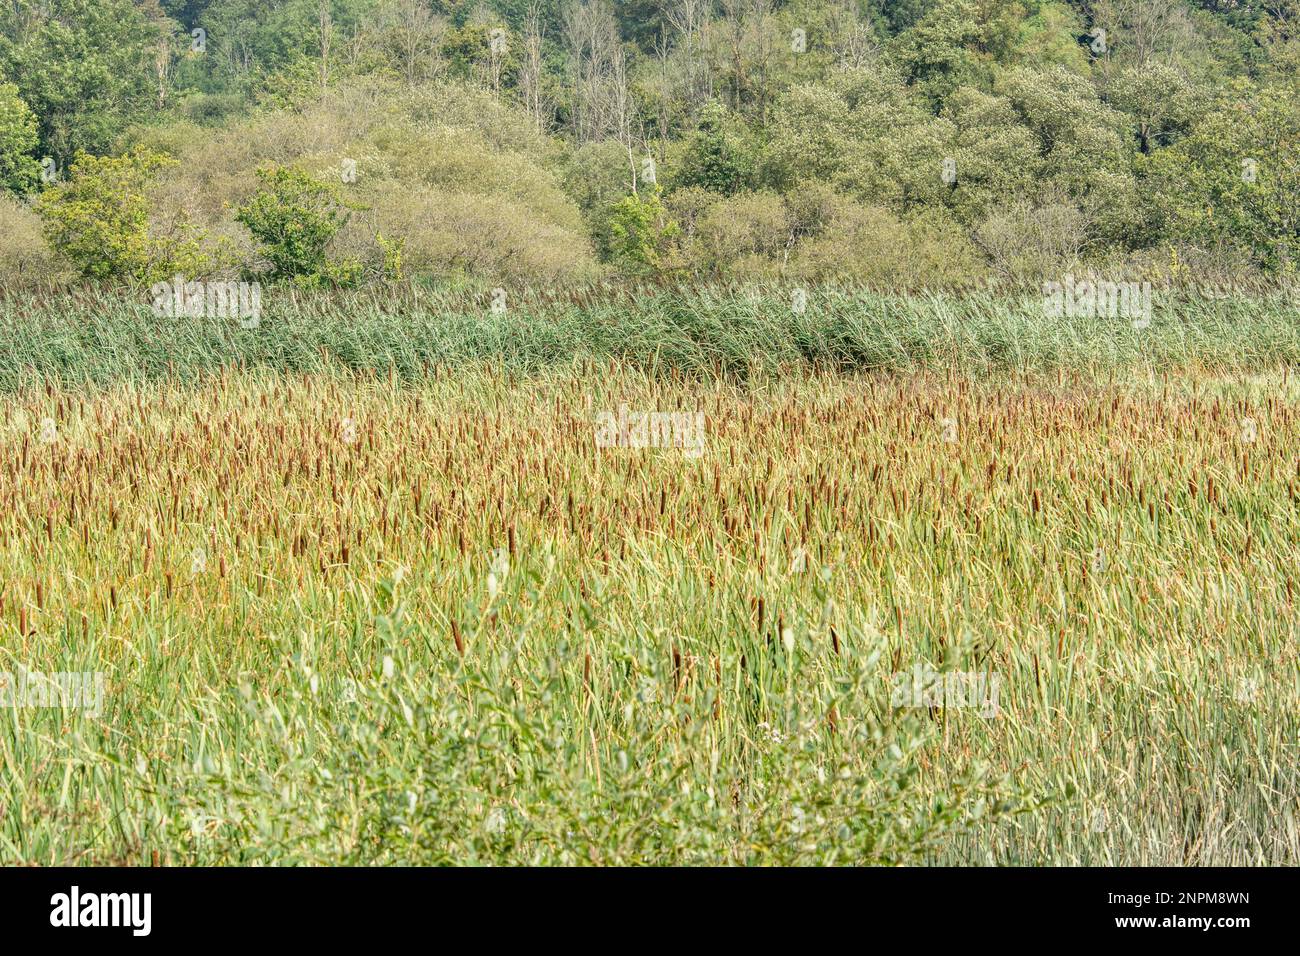 Reedbed (Cat's-tail and Common Reed species - Typha latifolia and Phragmites communis). Focal emphasis on the brown heads of the cat's-tails. Stock Photo